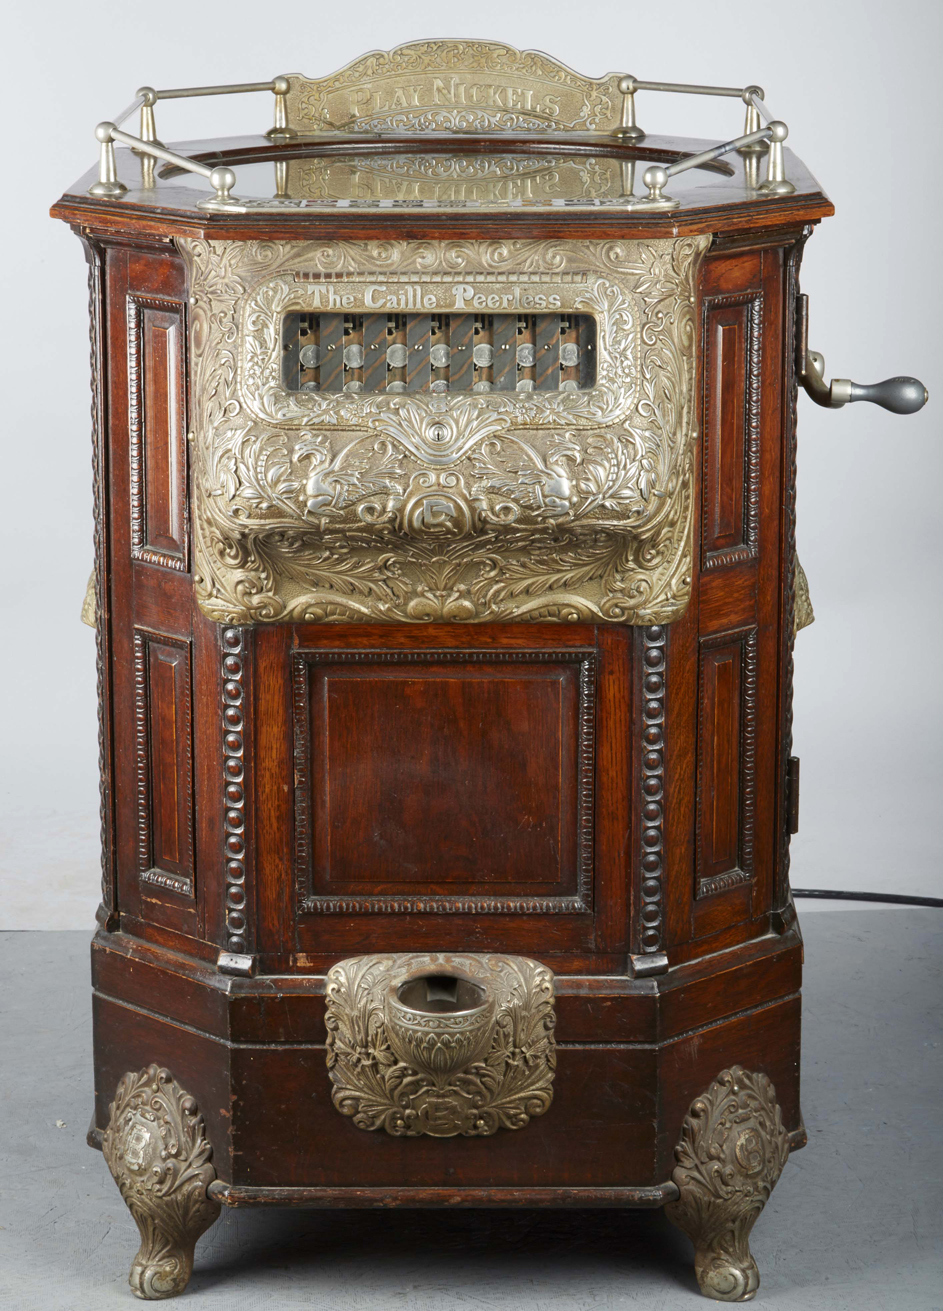 Caille Peerless 5-cent floor roulette slot machine, circa 1900, glass and wheel in mint original condition. Estimate $200,000-$250,000. Morphy Auctions image